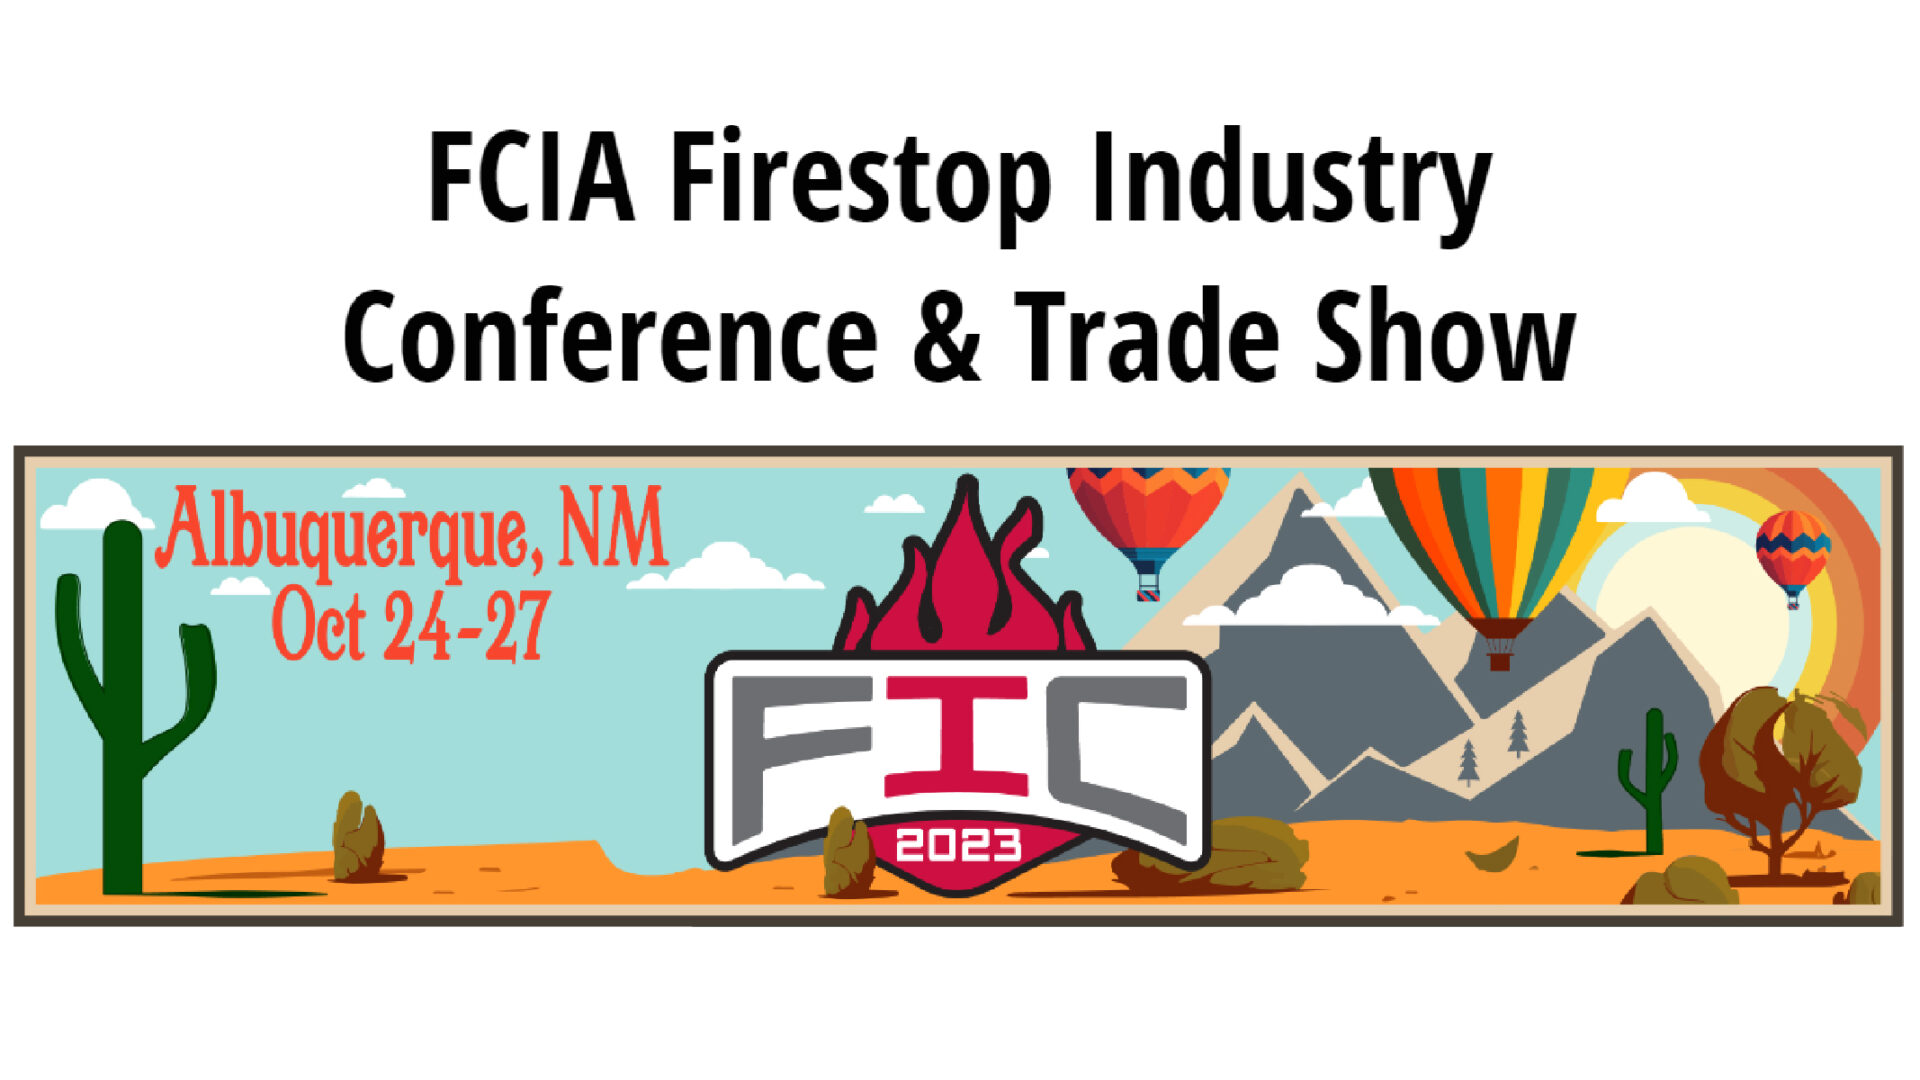 FIC ’23, the FCIA Firestop Industry Hybrid Conference & Trade Show